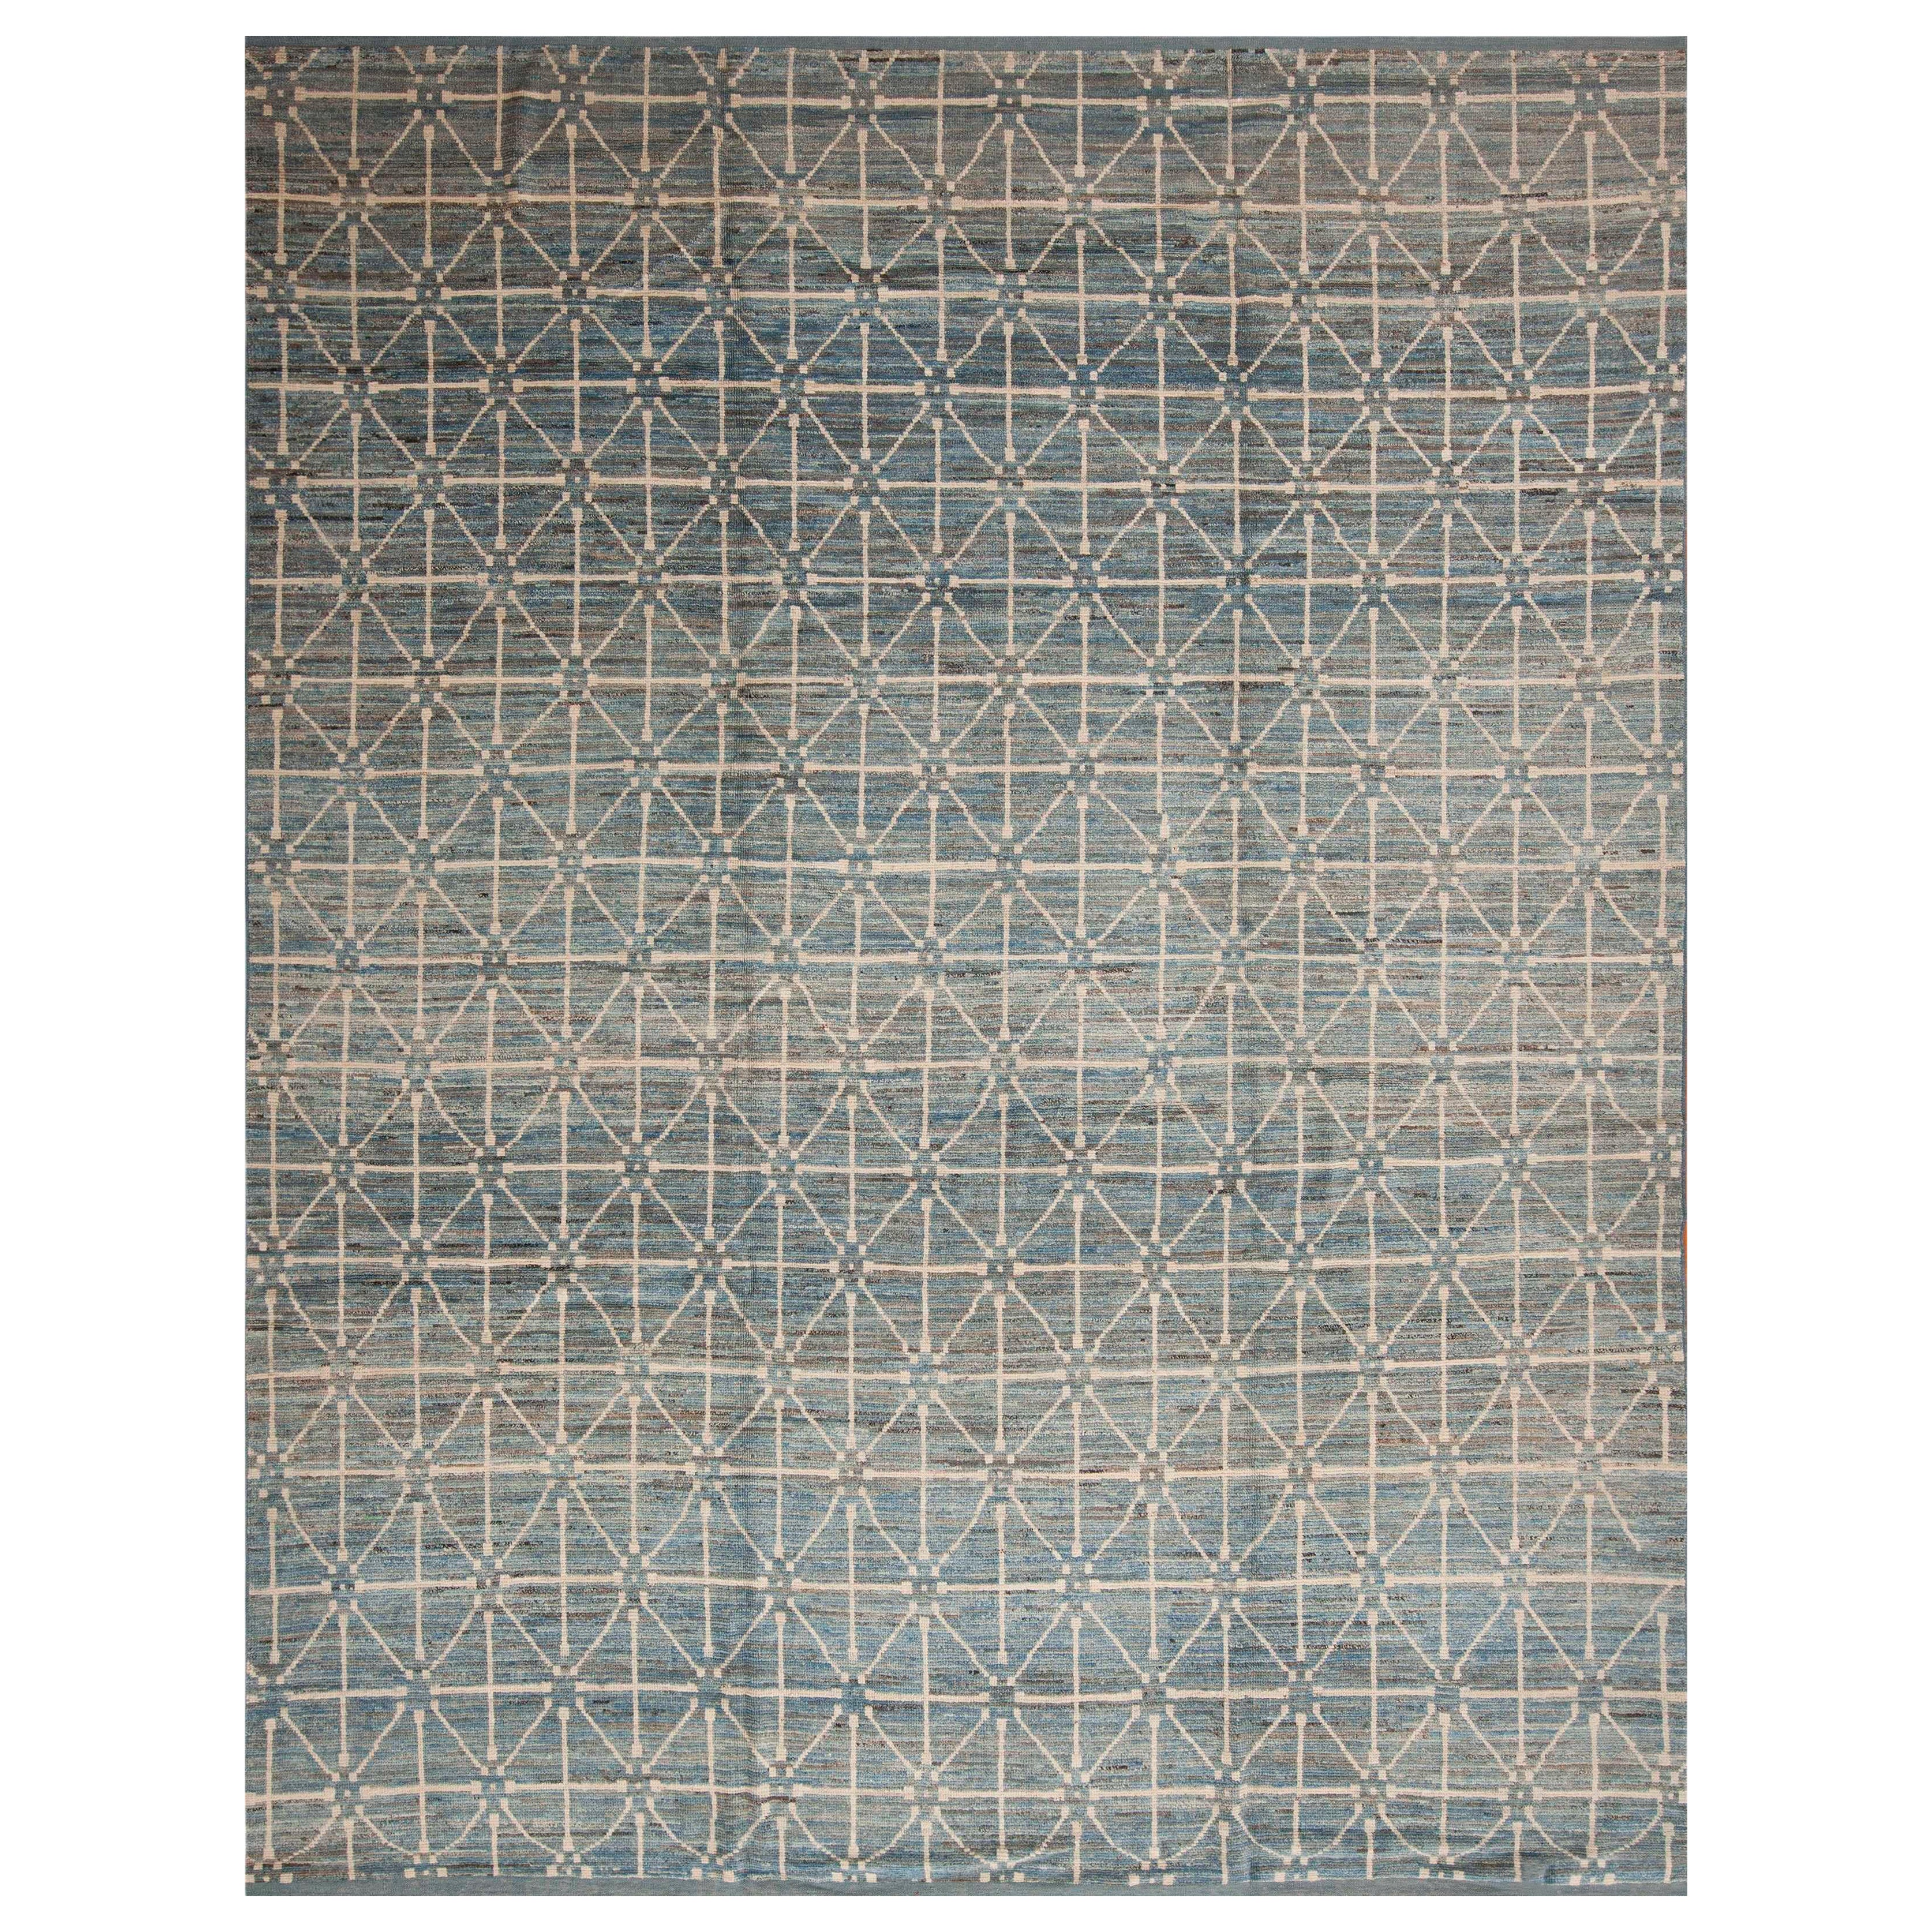 Nazmiyal Collection Grey Blue Color Allover Modern Area Rug 9'5" x 12'4"